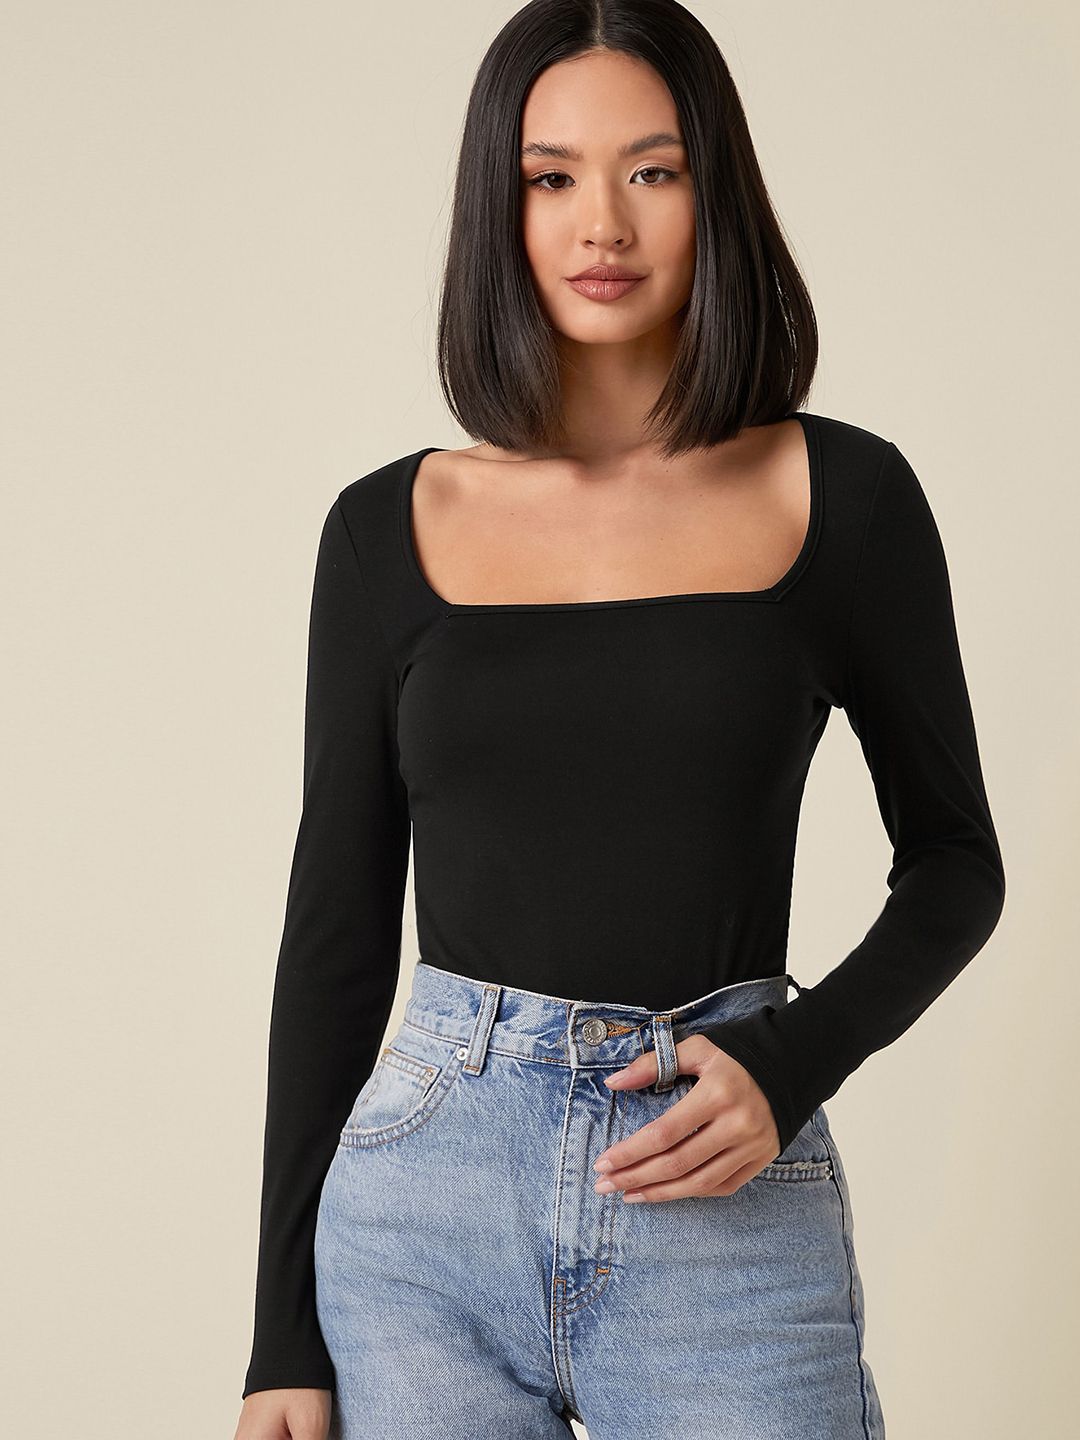 AAHWAN Black Solid Basic Square Neck Top Price in India